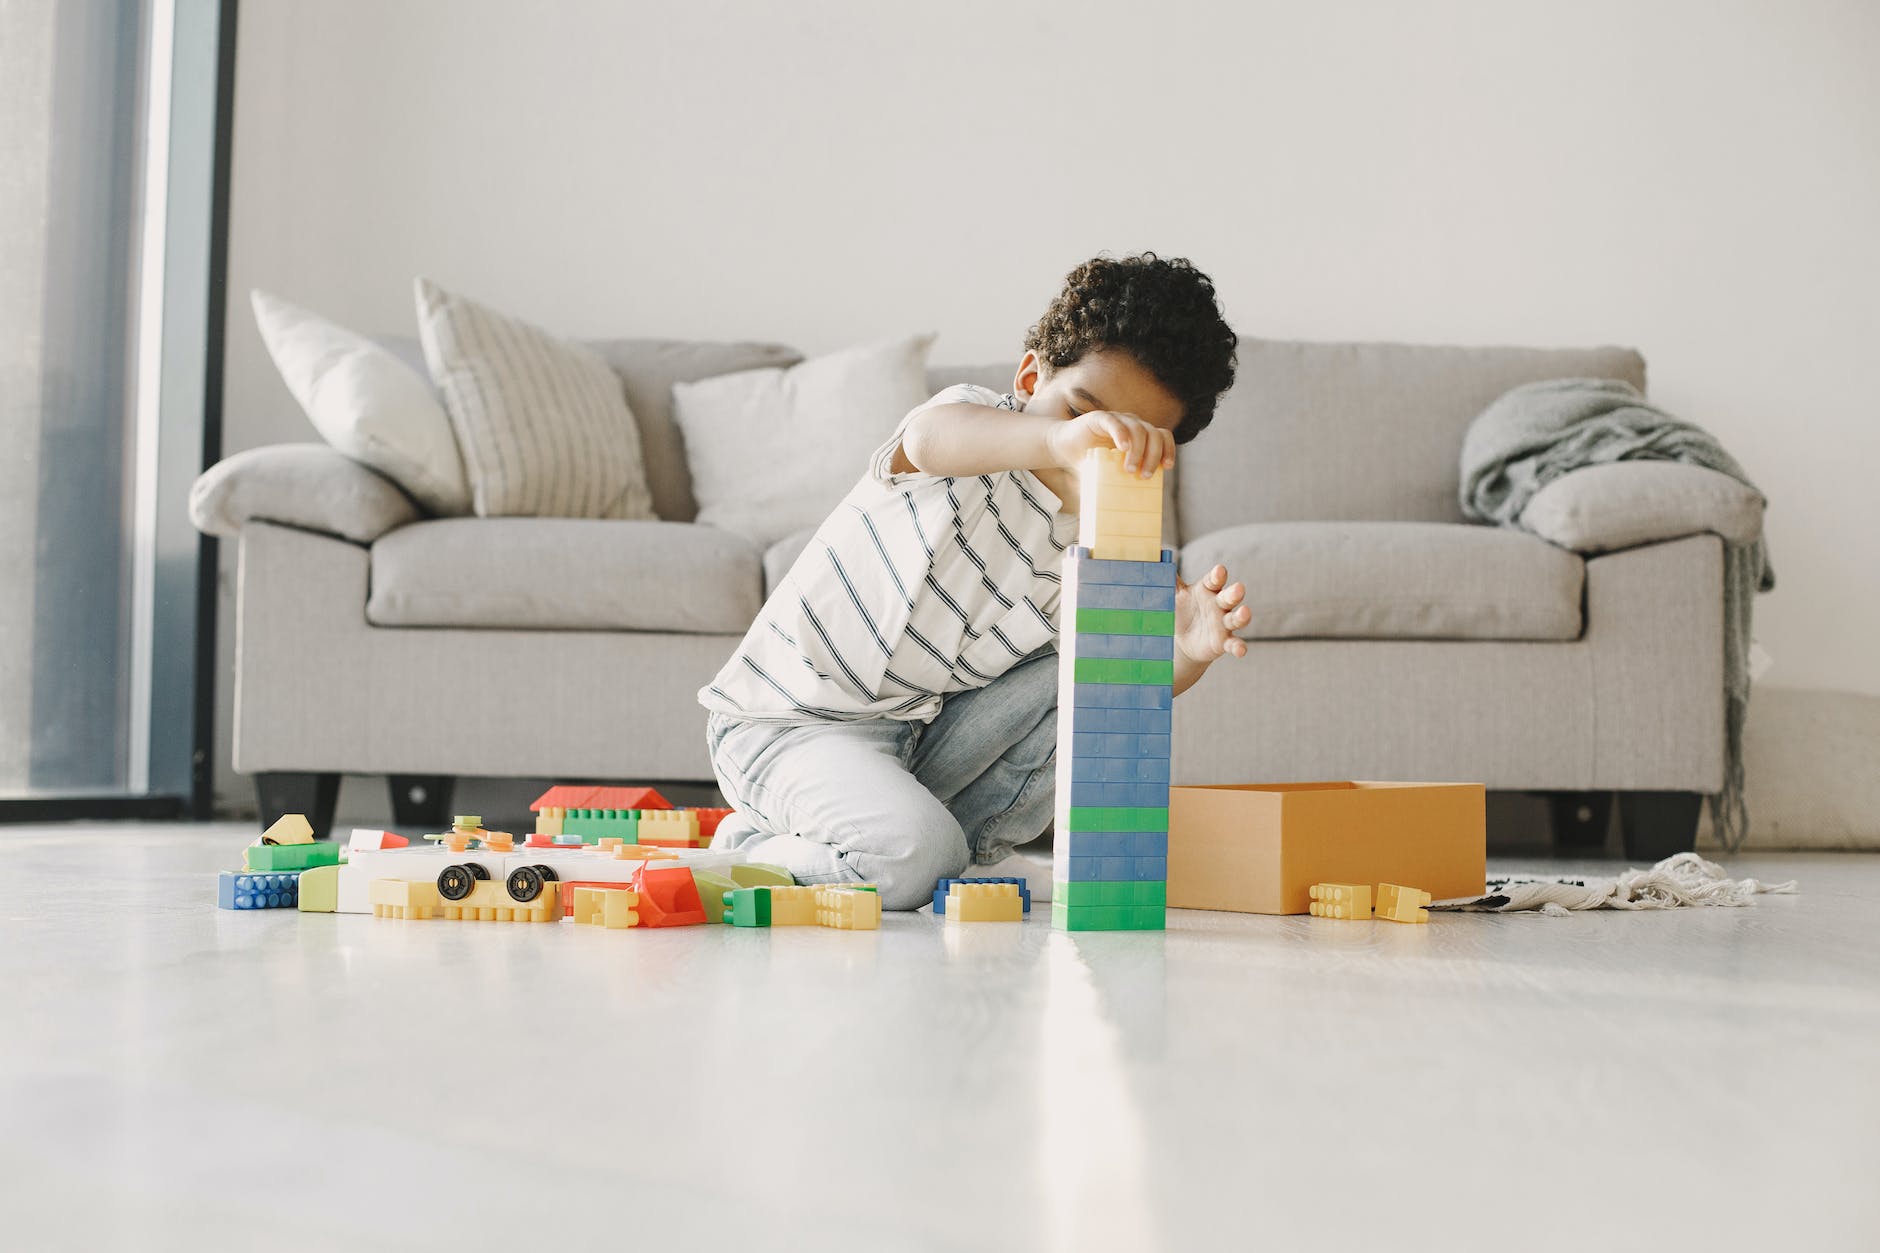 little boy building with blocks in a living room